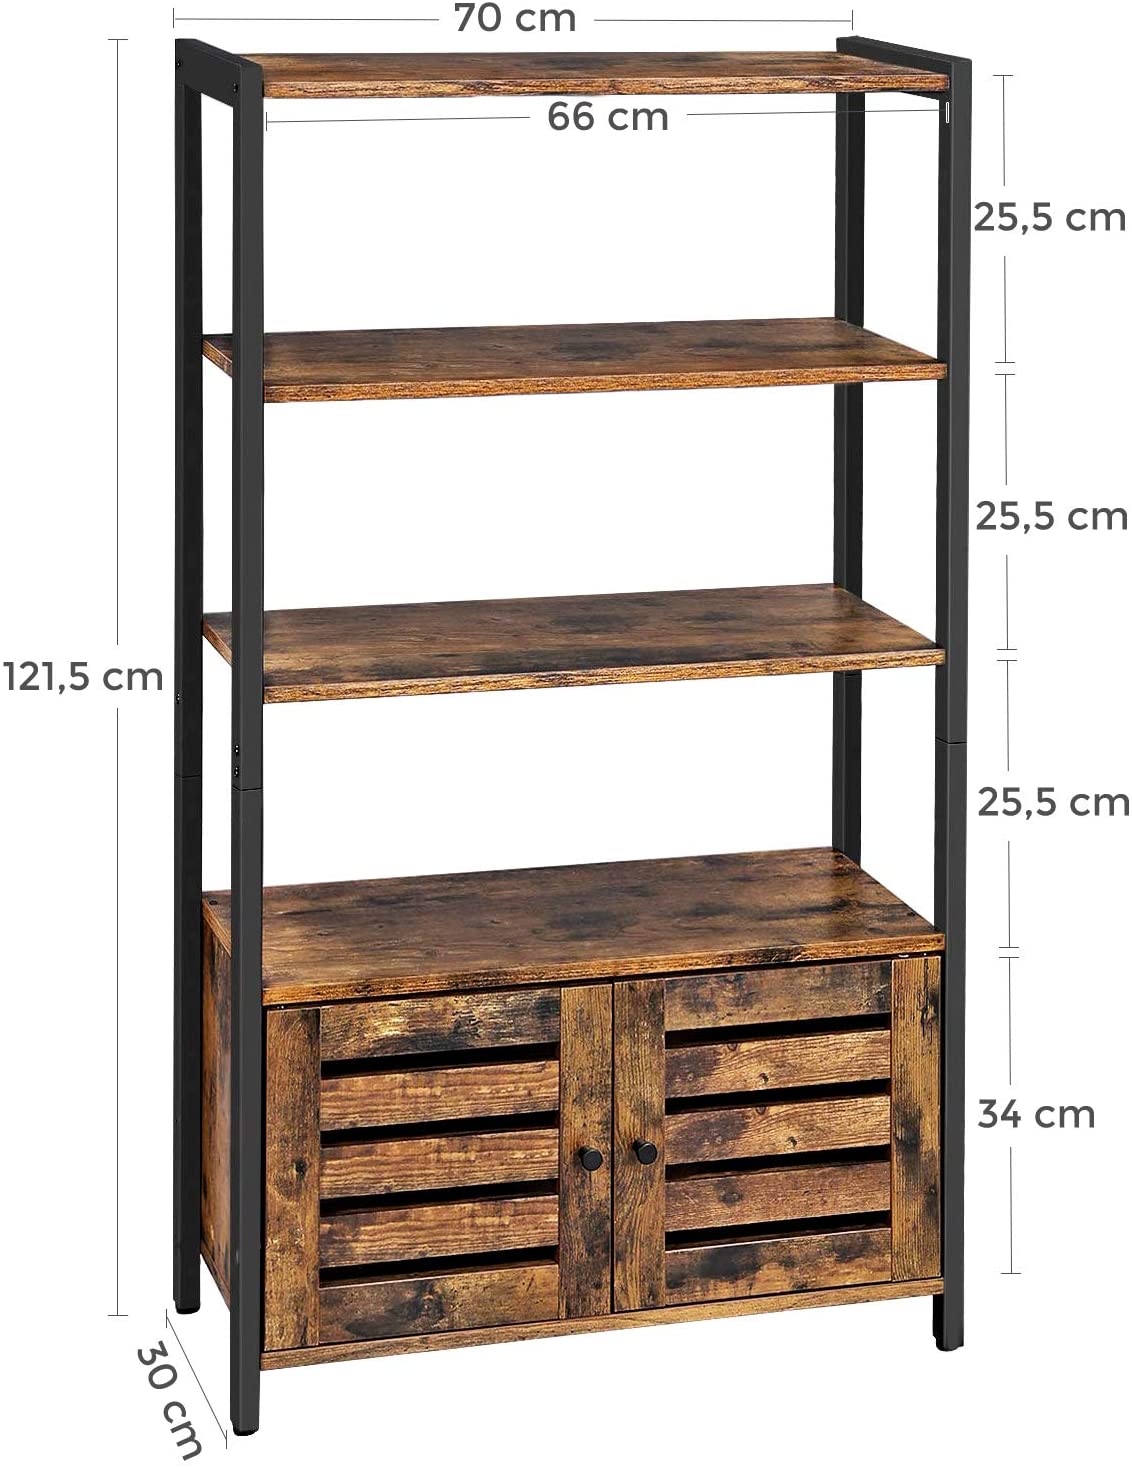 Floor-Standing Storage Cabinet and Cupboard with 2 Louvred Doors and 3 Shelves, Rustic Brown - image5